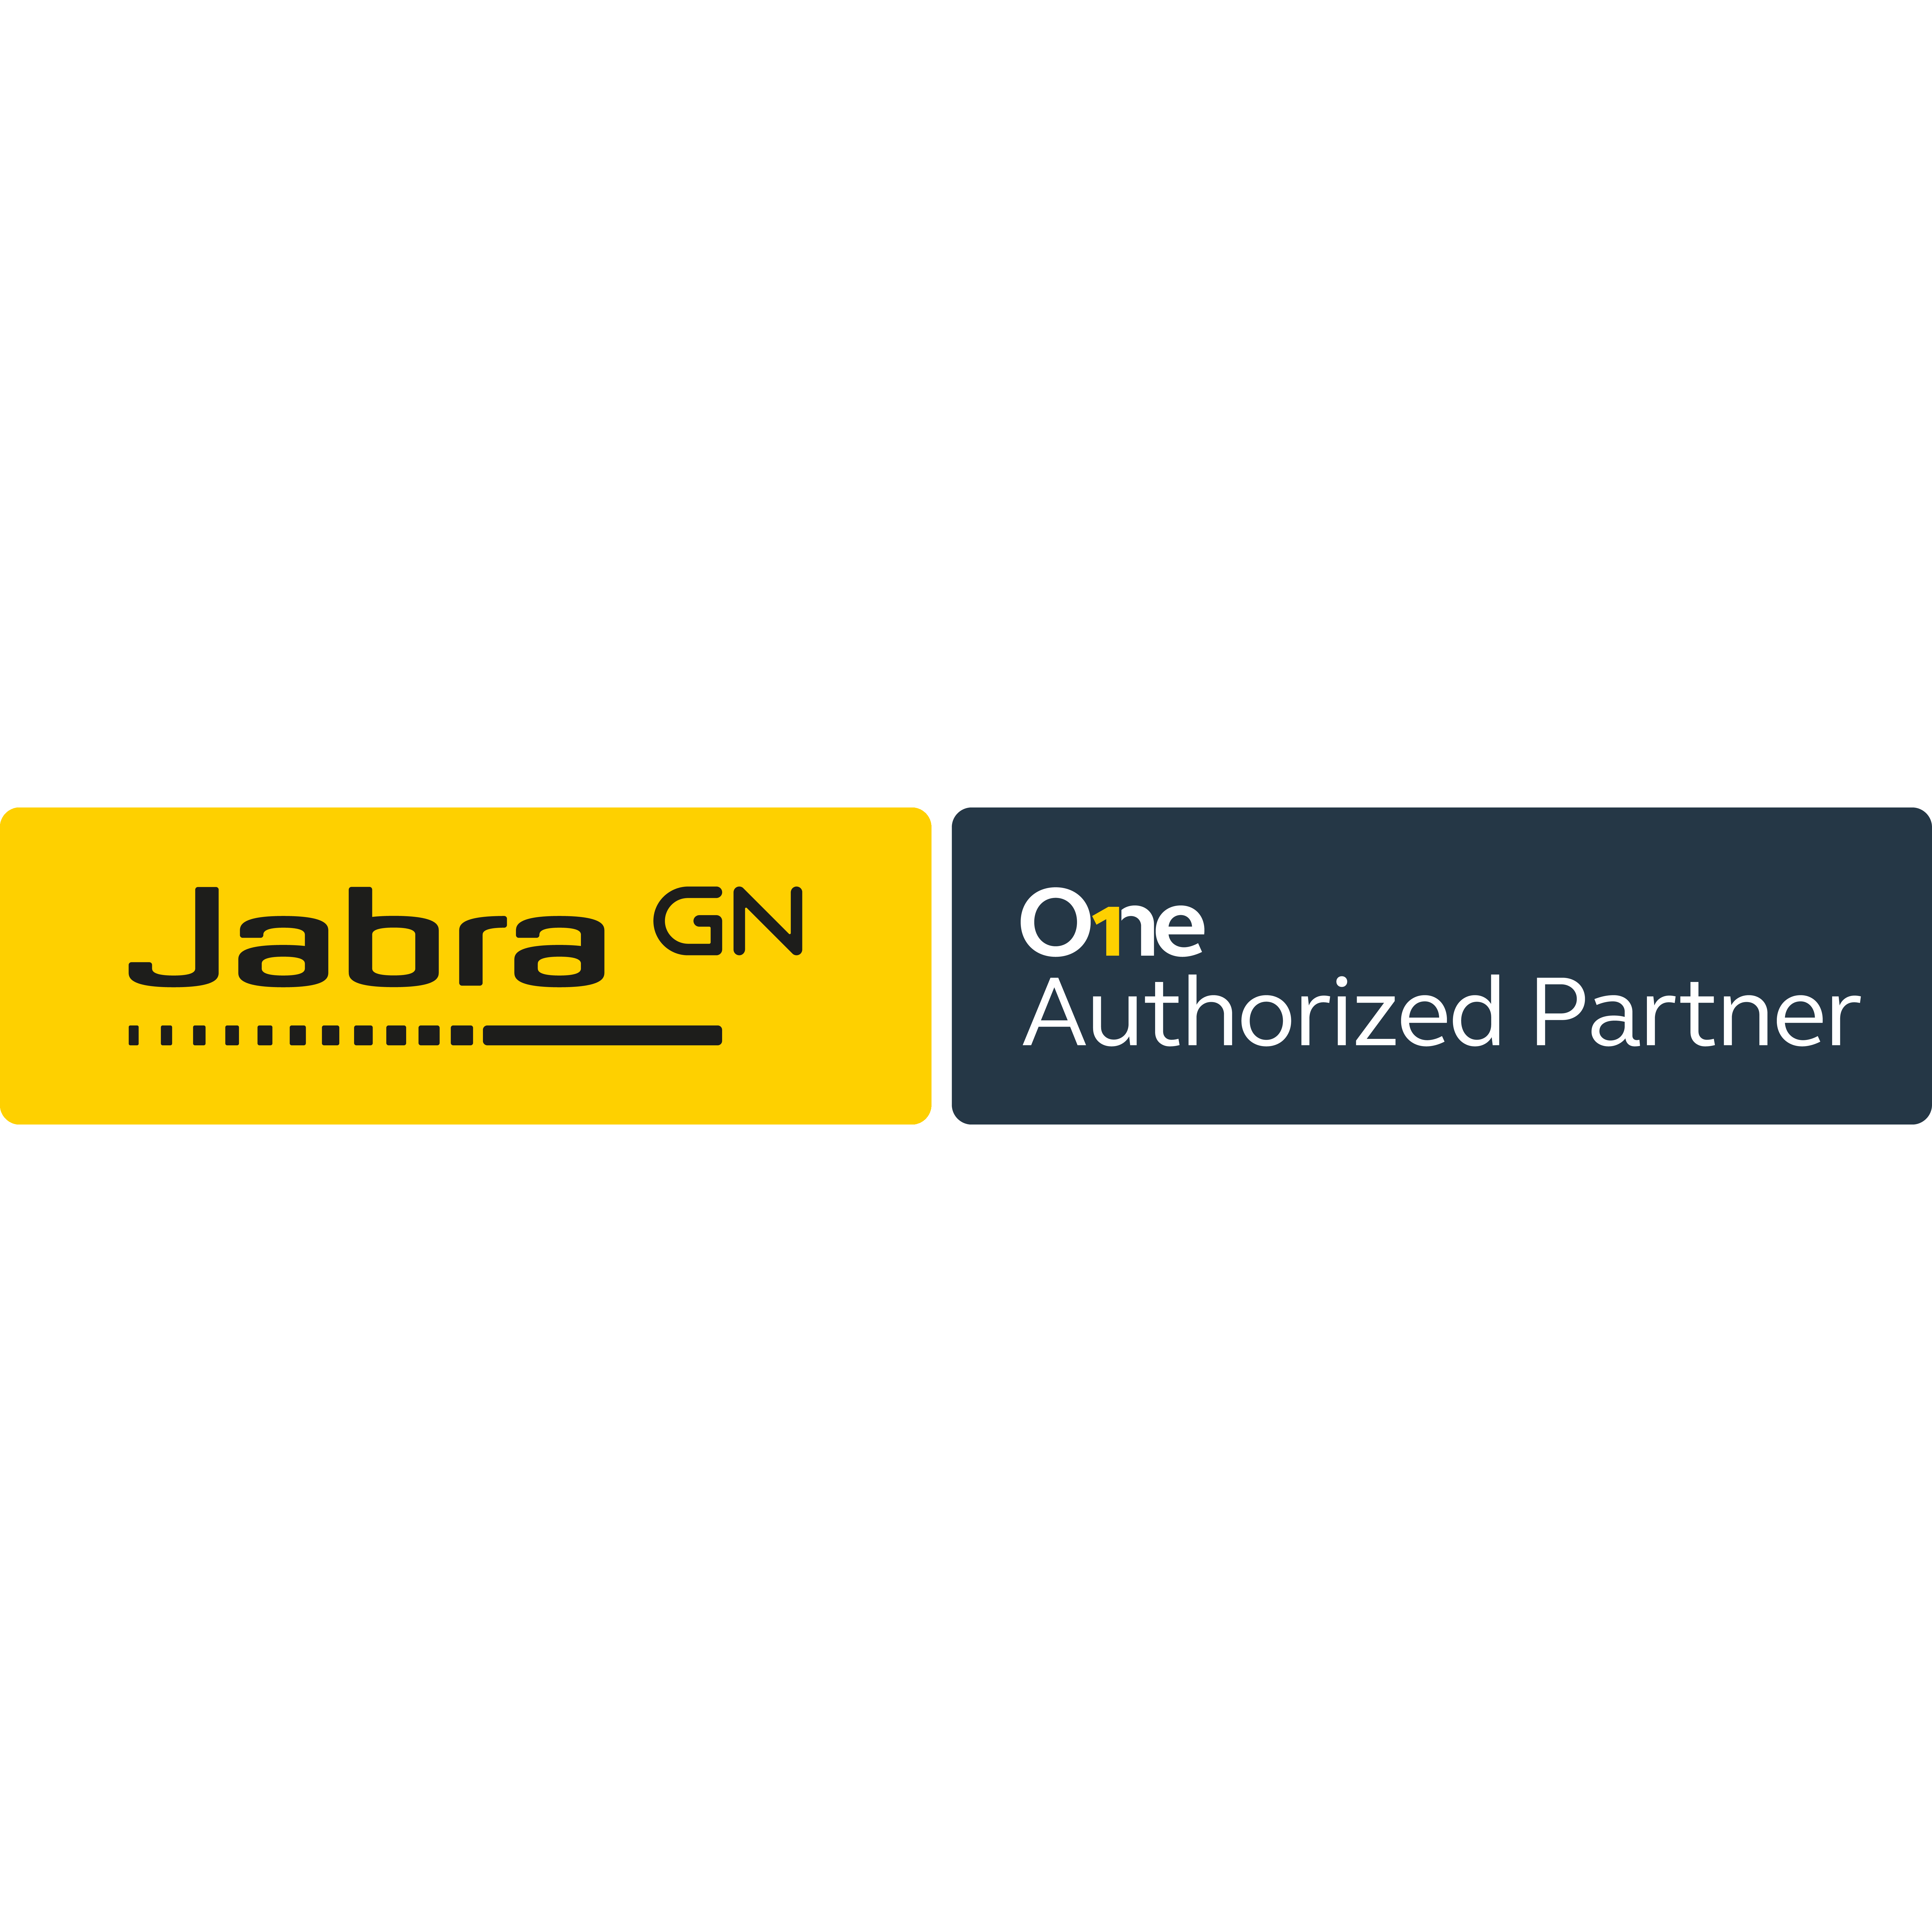 Jabra_GN_RGB One PP AuthPart land 72dpi.png